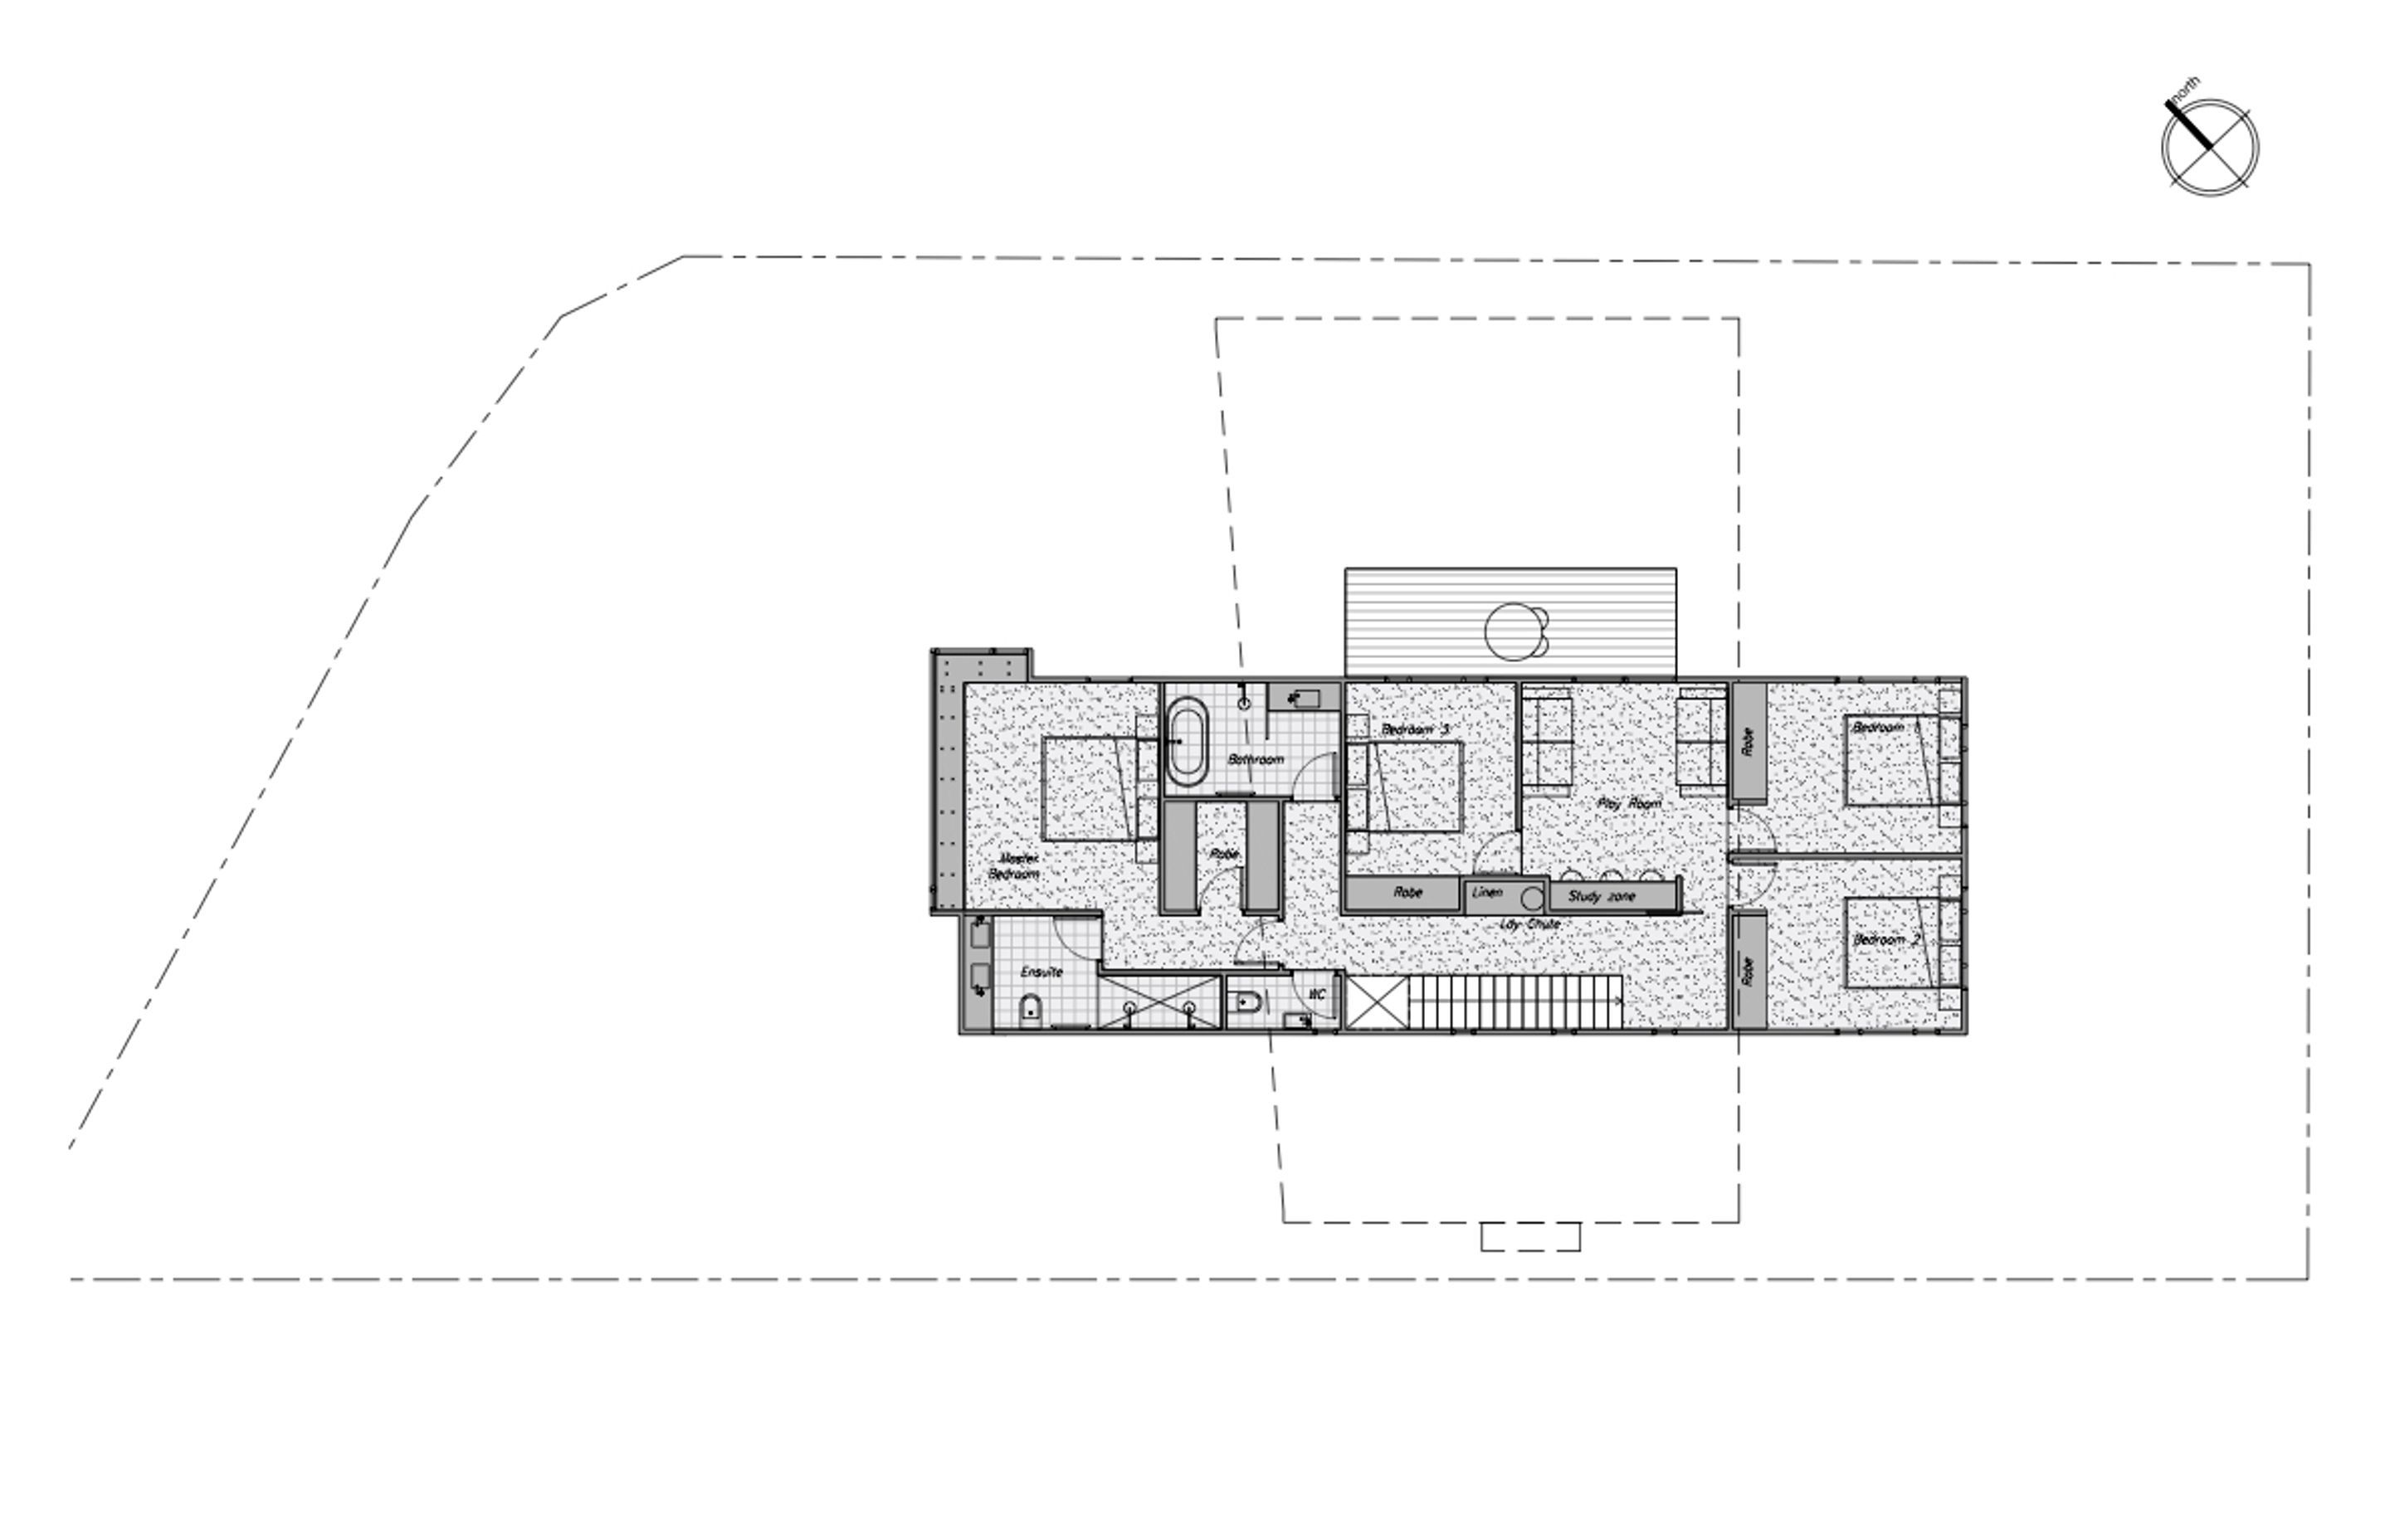 Upper-floor plan by by Dorrington Atcheson Architects.